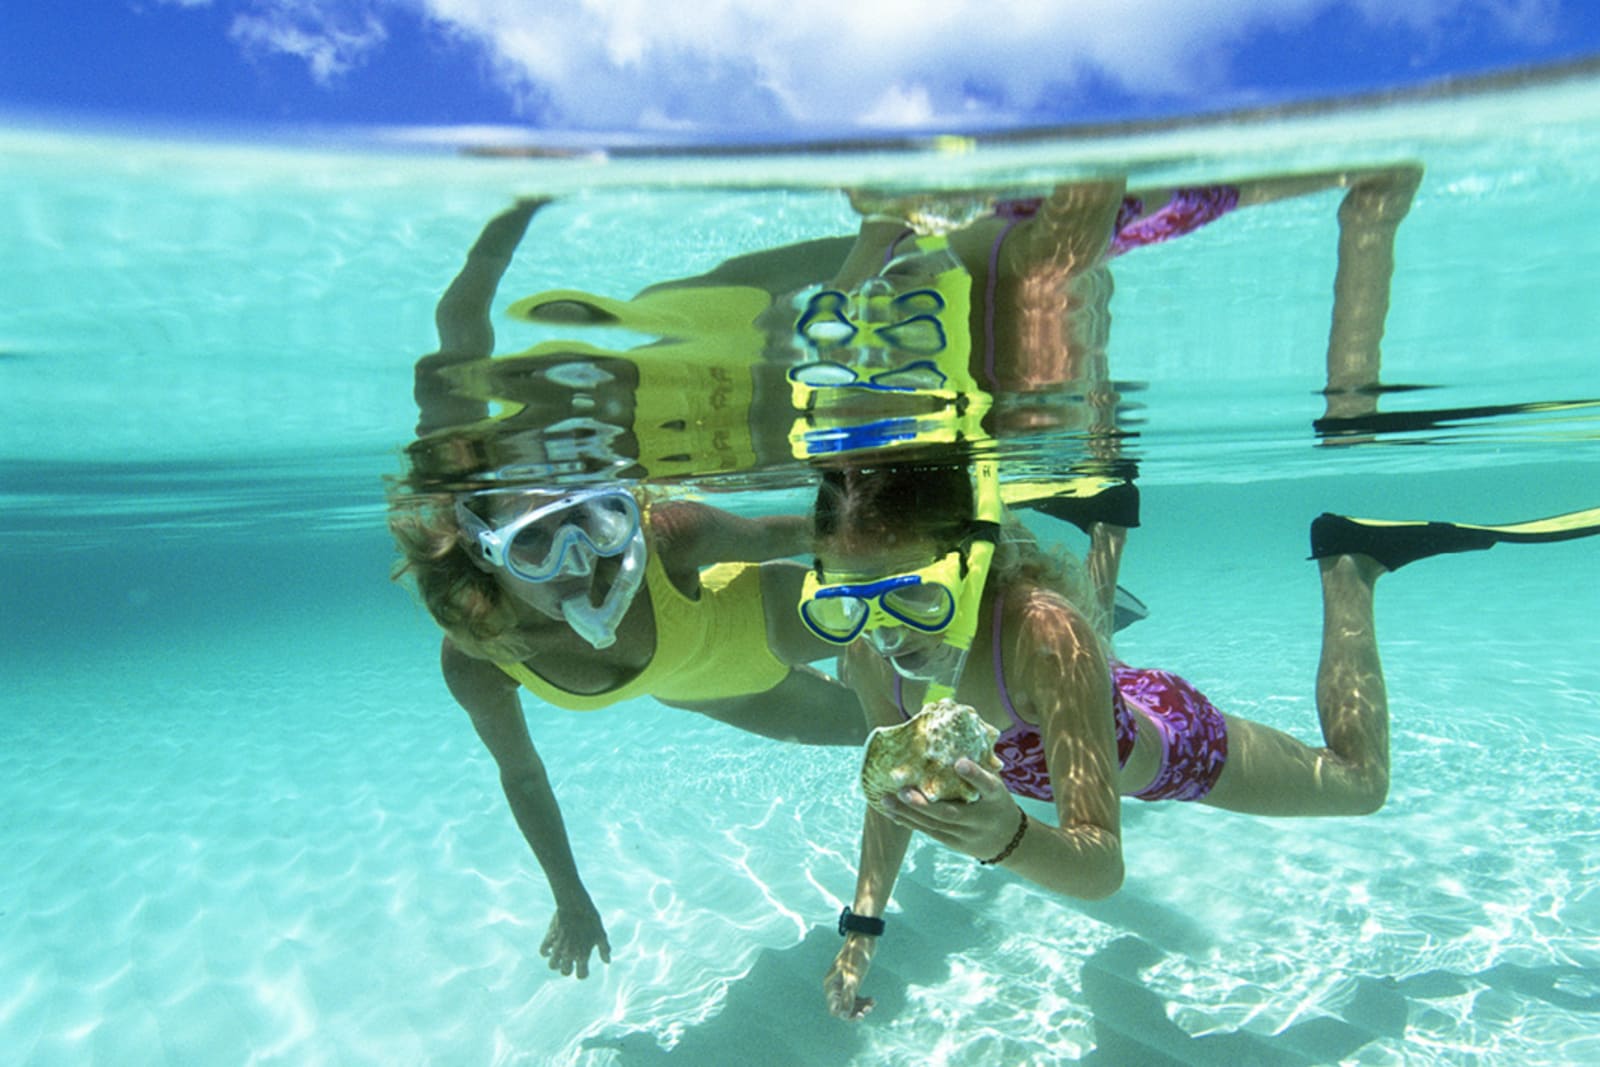 A mother and daughter snorkelling in shallow water